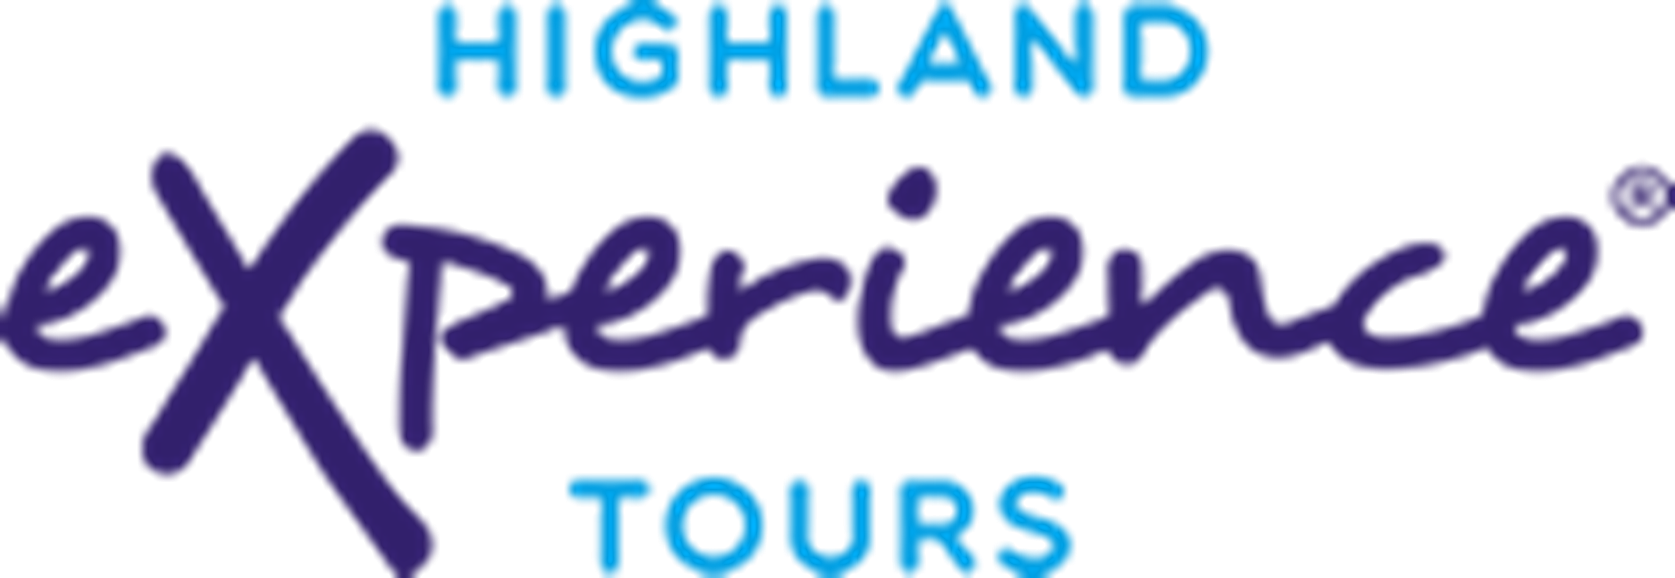 Highland Experience Tours